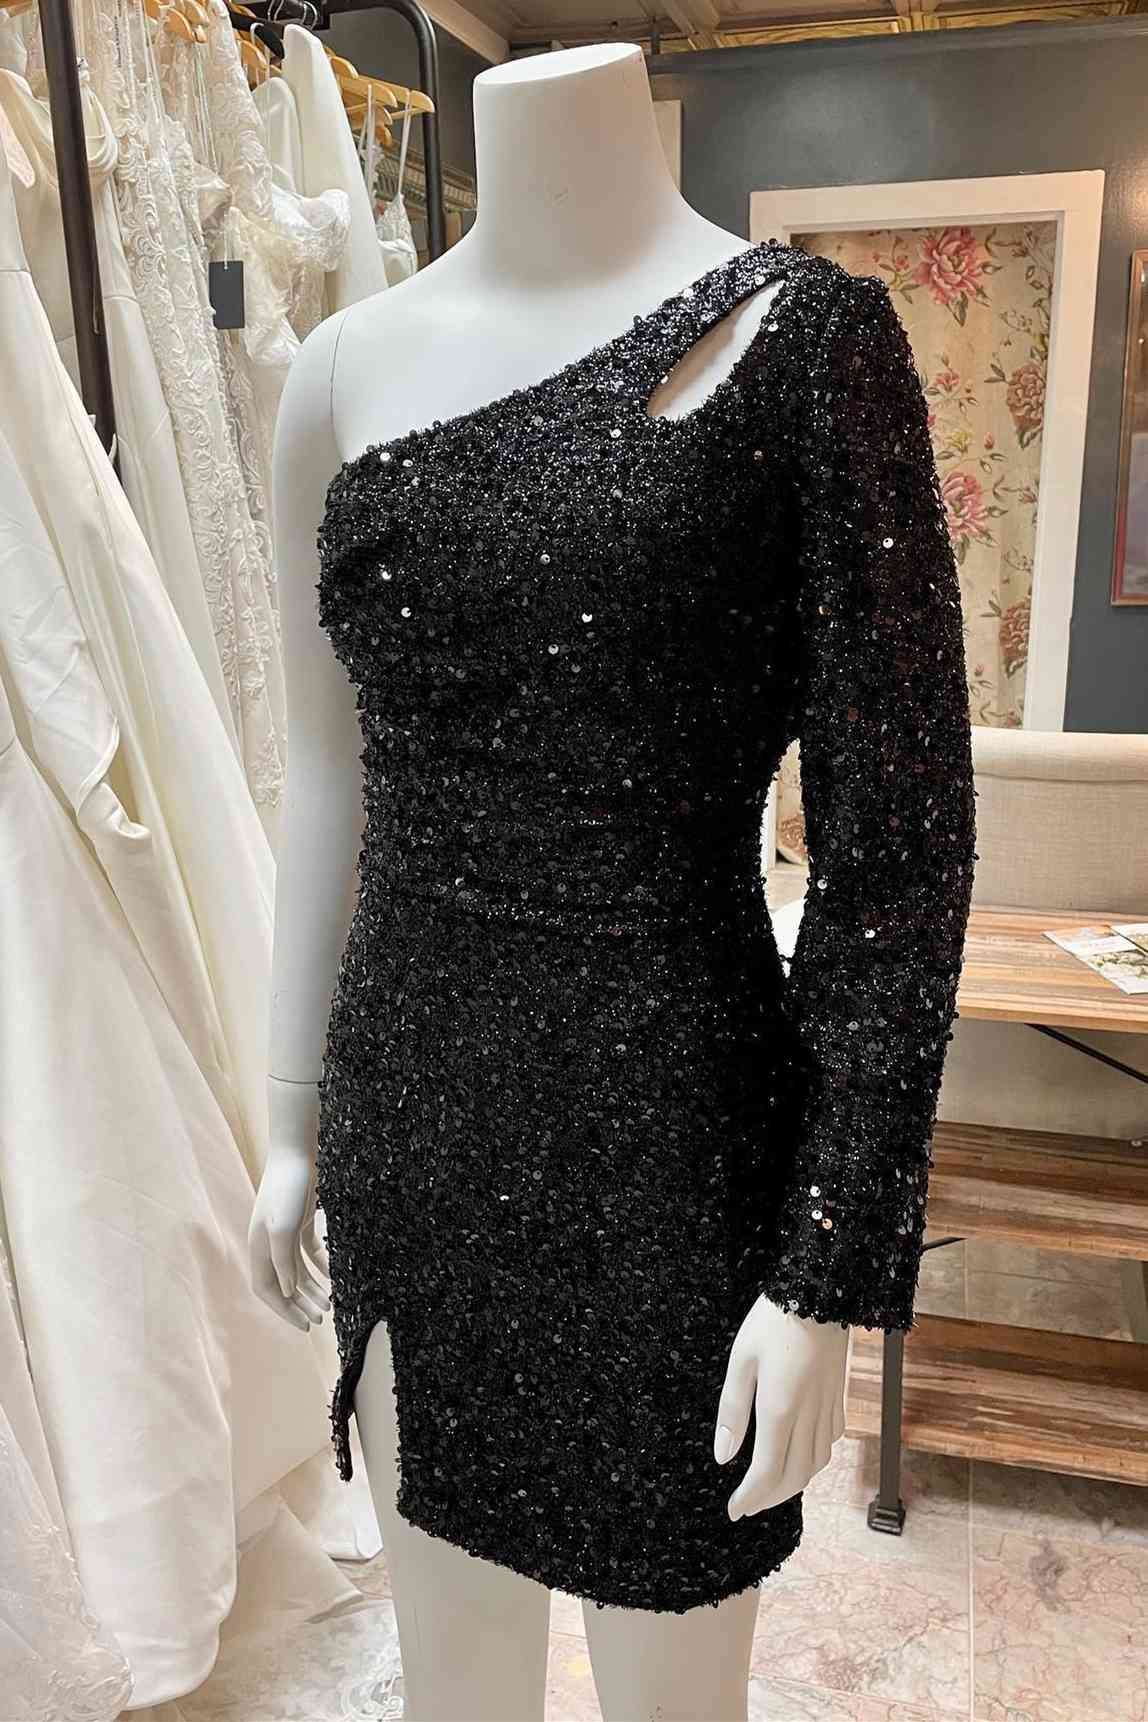 Homecoming Dress Stores, Cut Out Long Sleeve Black Sequins Tight Homecoming Dress Gala Dresses Short